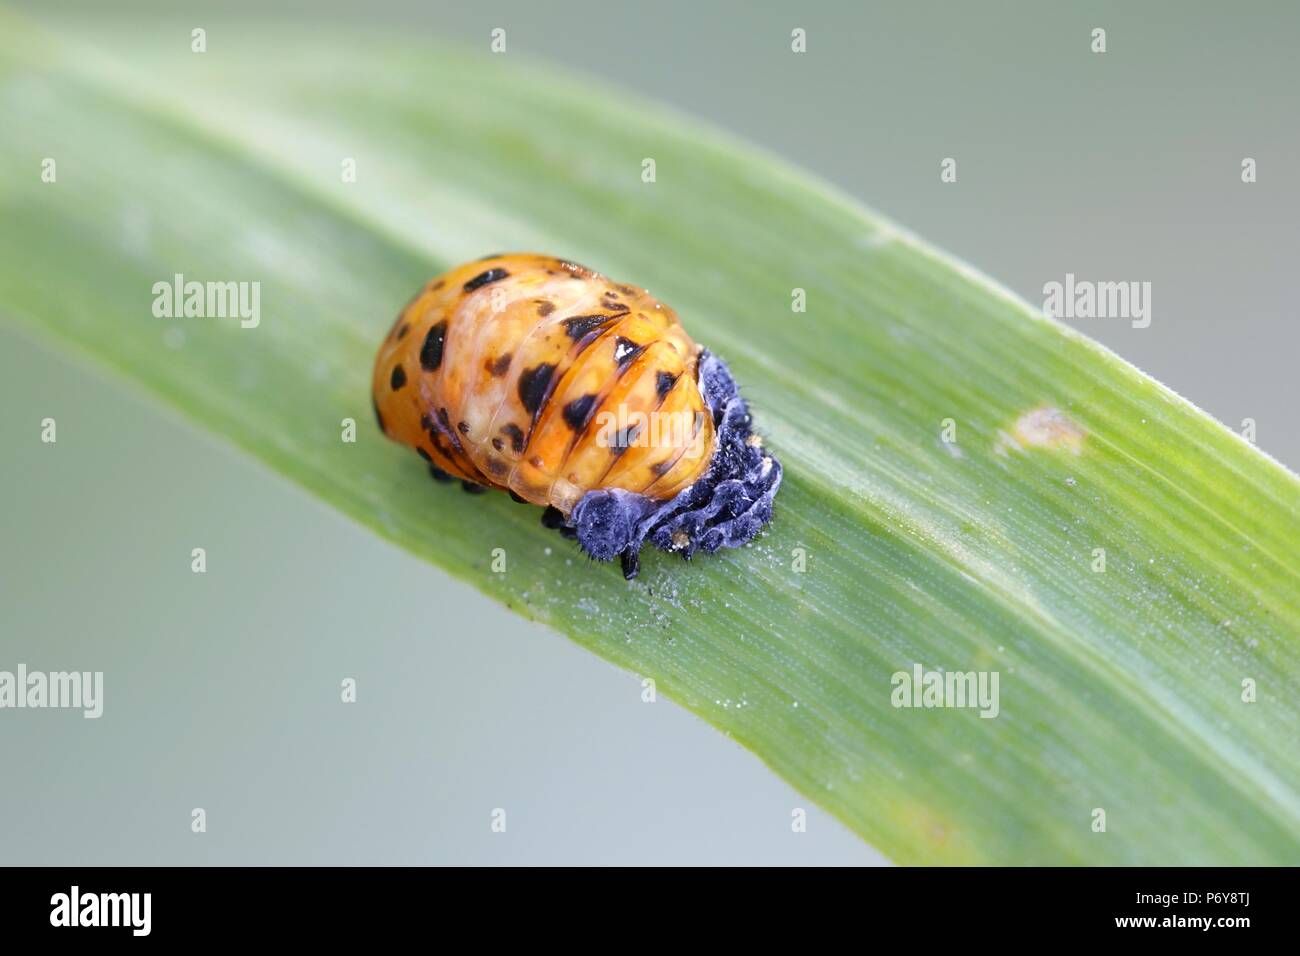 Two-spot ladybird or two-spotted ladybug cocoon,   Adalia bipunctata, used for biological pest control of   aphids, Stock Photo